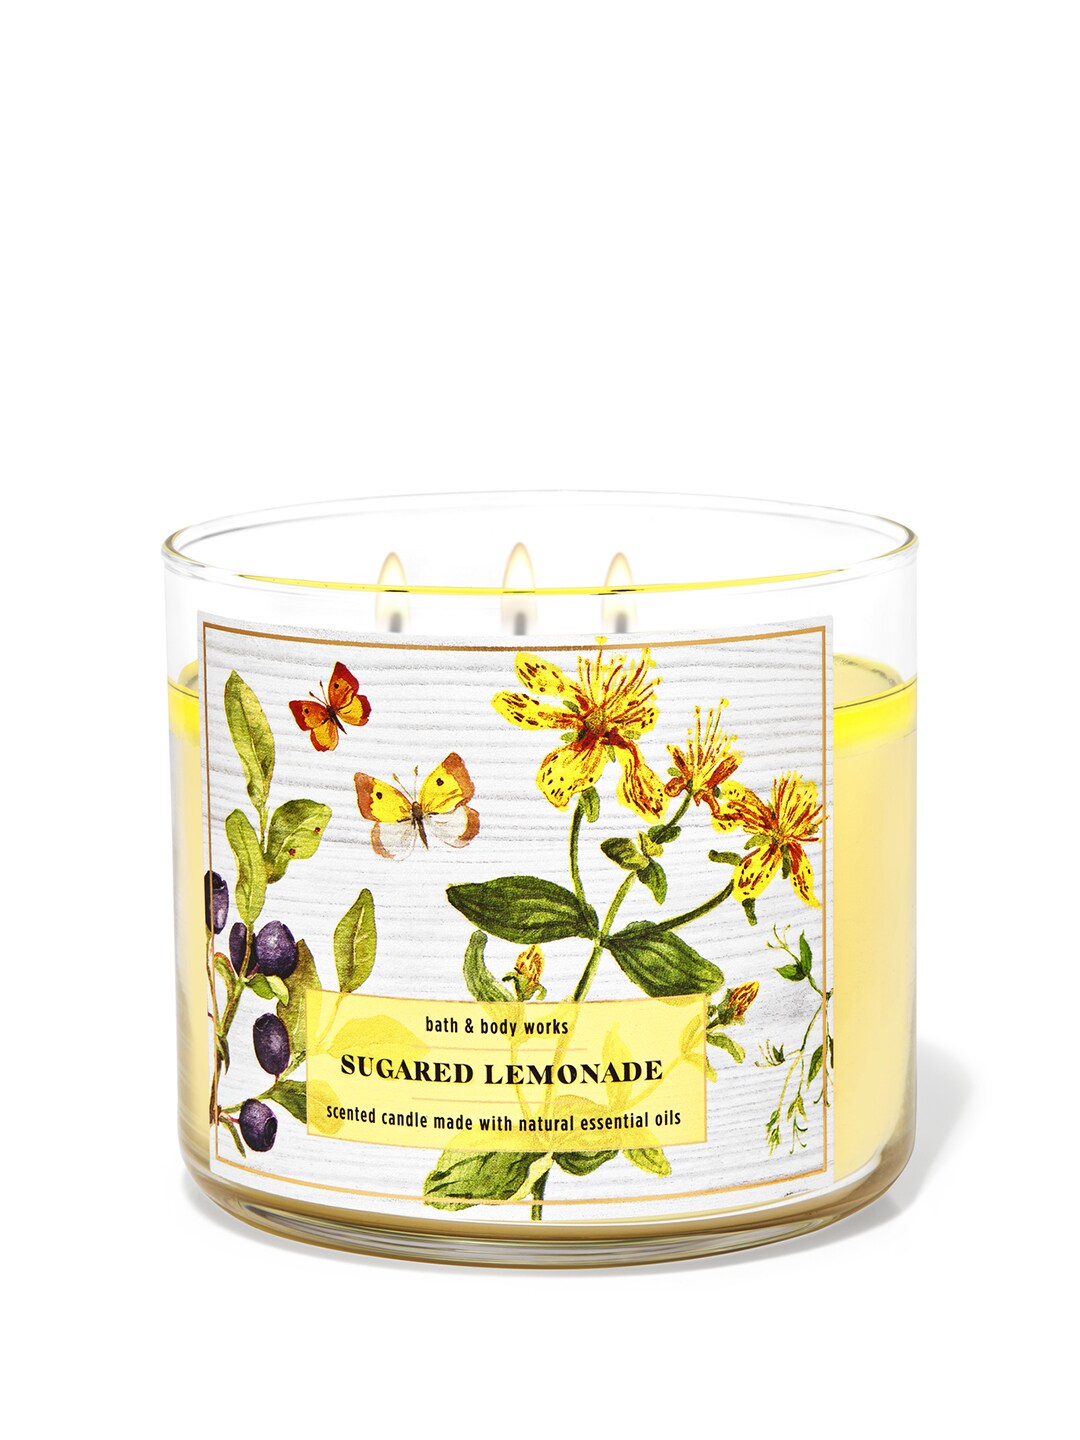 Bath & Body Works Sugared Lemonade 3-Wick Scented Candle with Natural Essential Oils- 411g Price in India